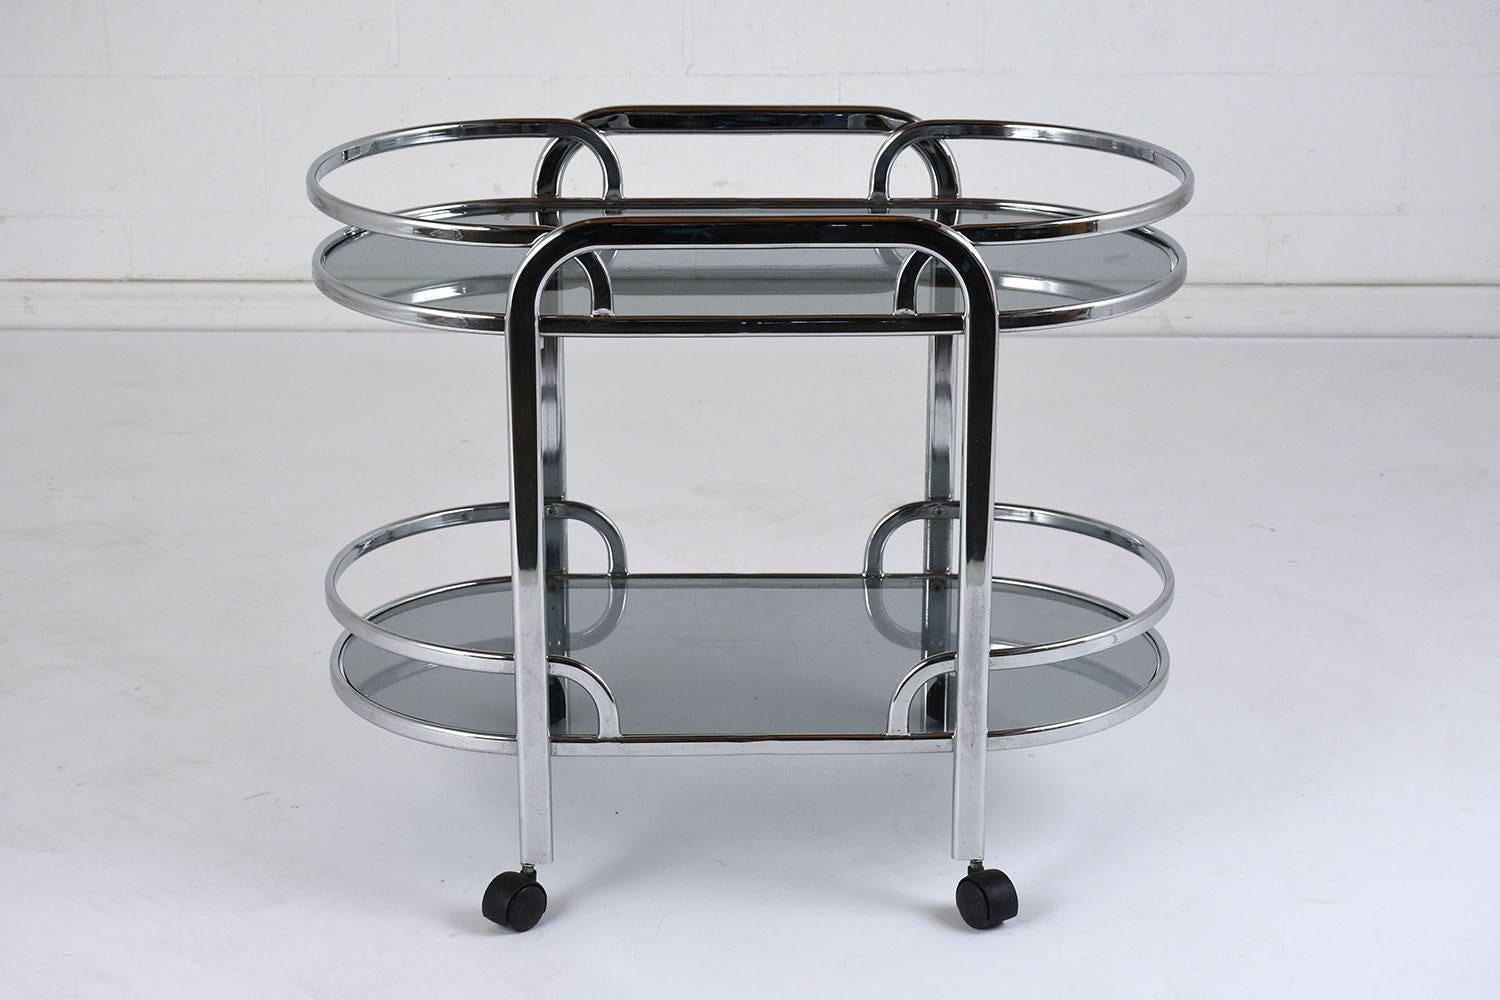 This 1960s Mid-Century Modern style bar cart features a chromed steel frame and smoked glass shelves. The top and bottom tier mimic each other with curved edges and flat rails. The handles on the sides of the cart lead down to the wheels. The caster